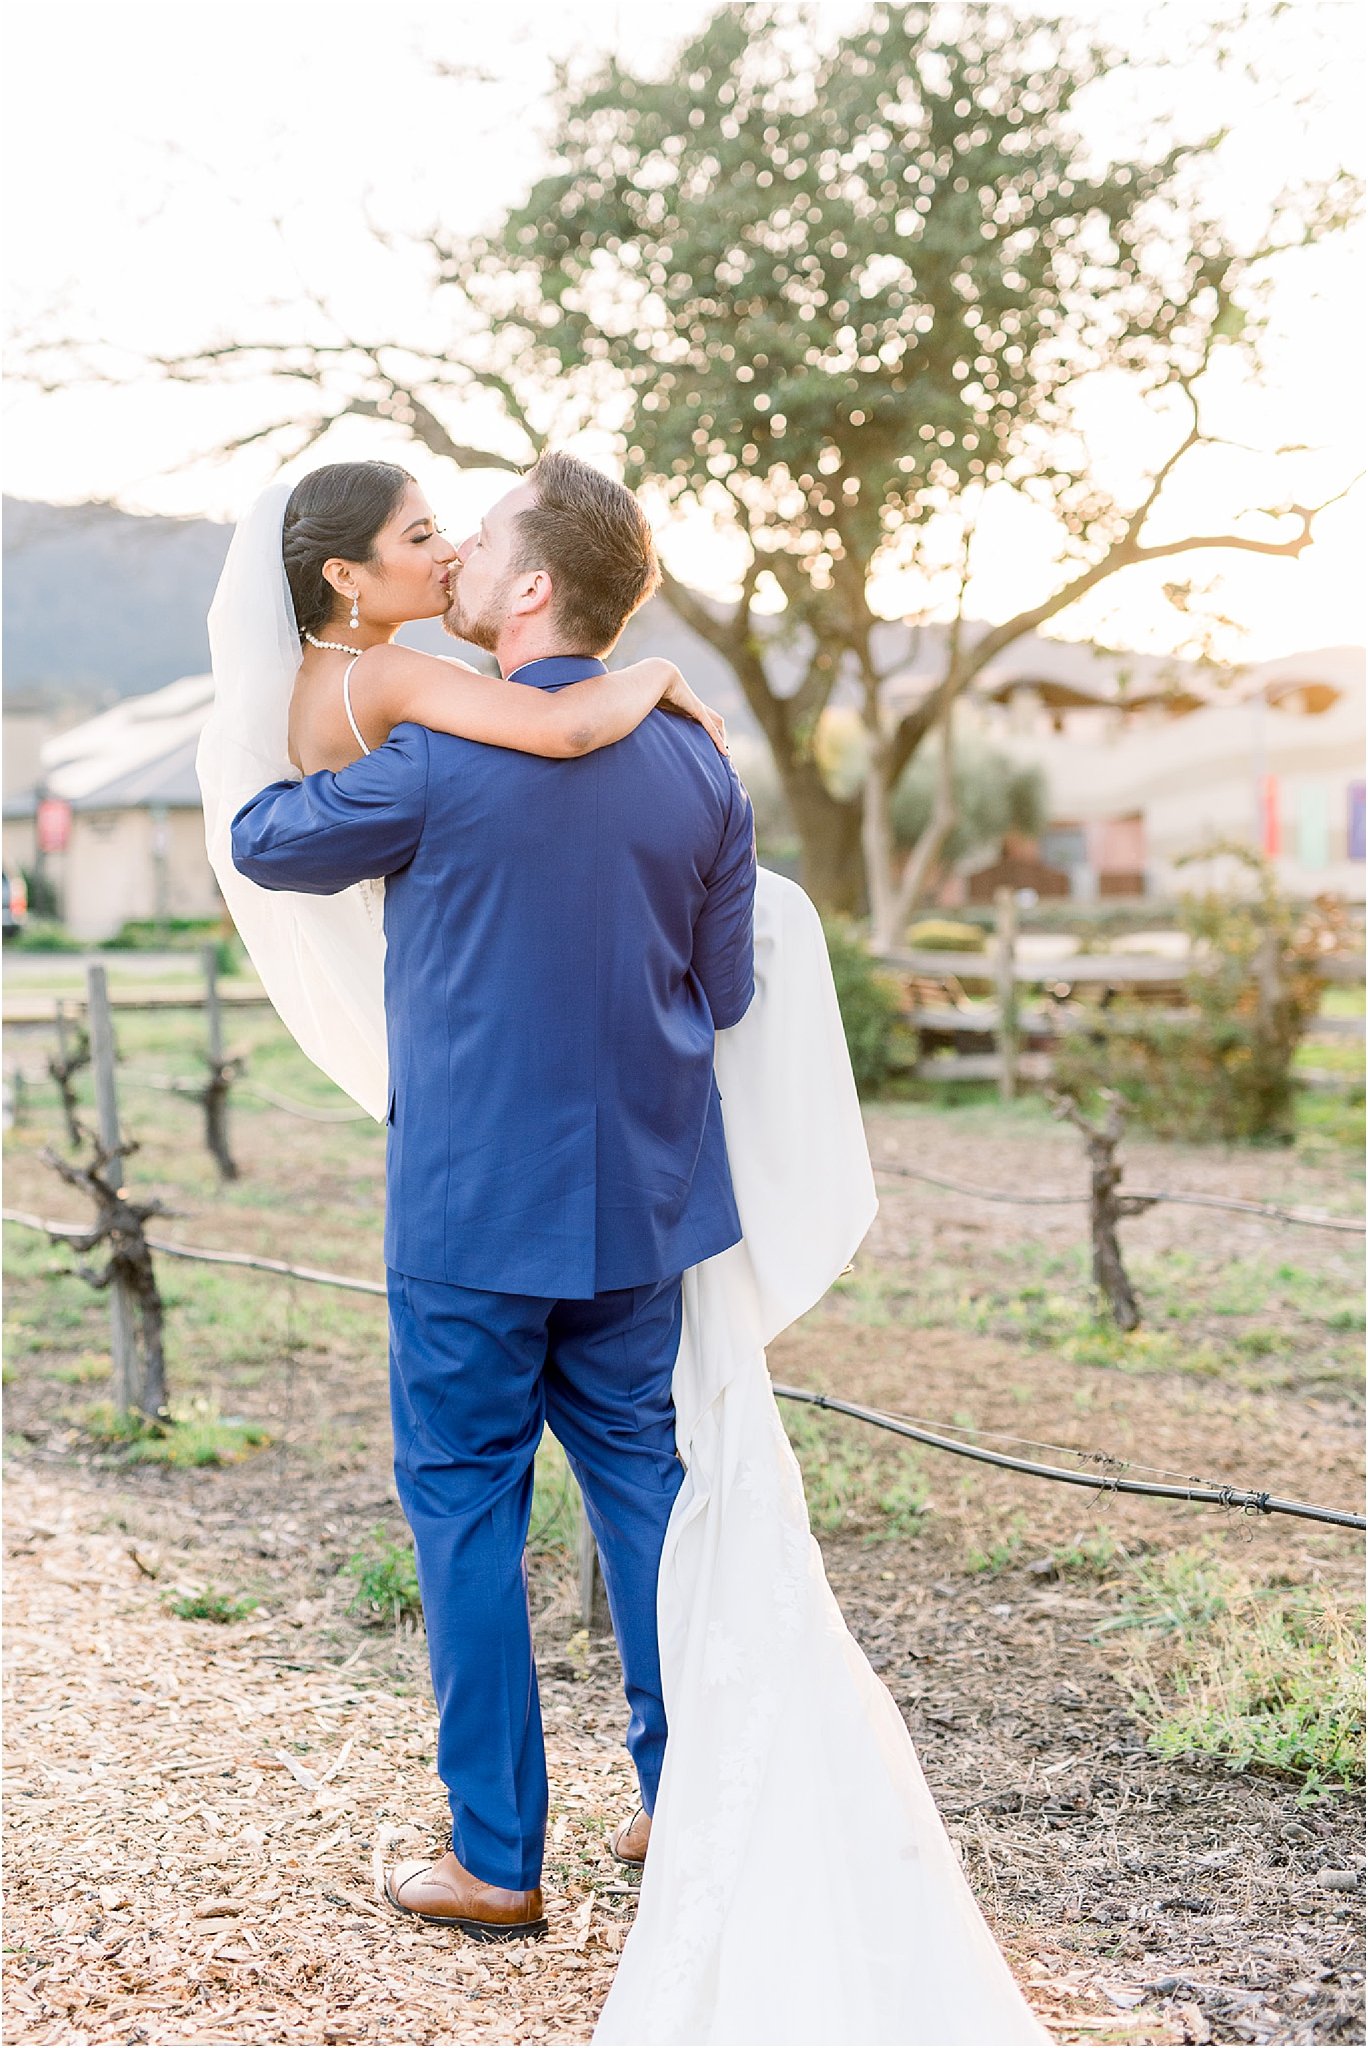 V. Sattui Winery Wedding | Napa Valley, CA | Annie and Pablo bride and groom photos | Napa Valley Wedding Photographer | West End Photography